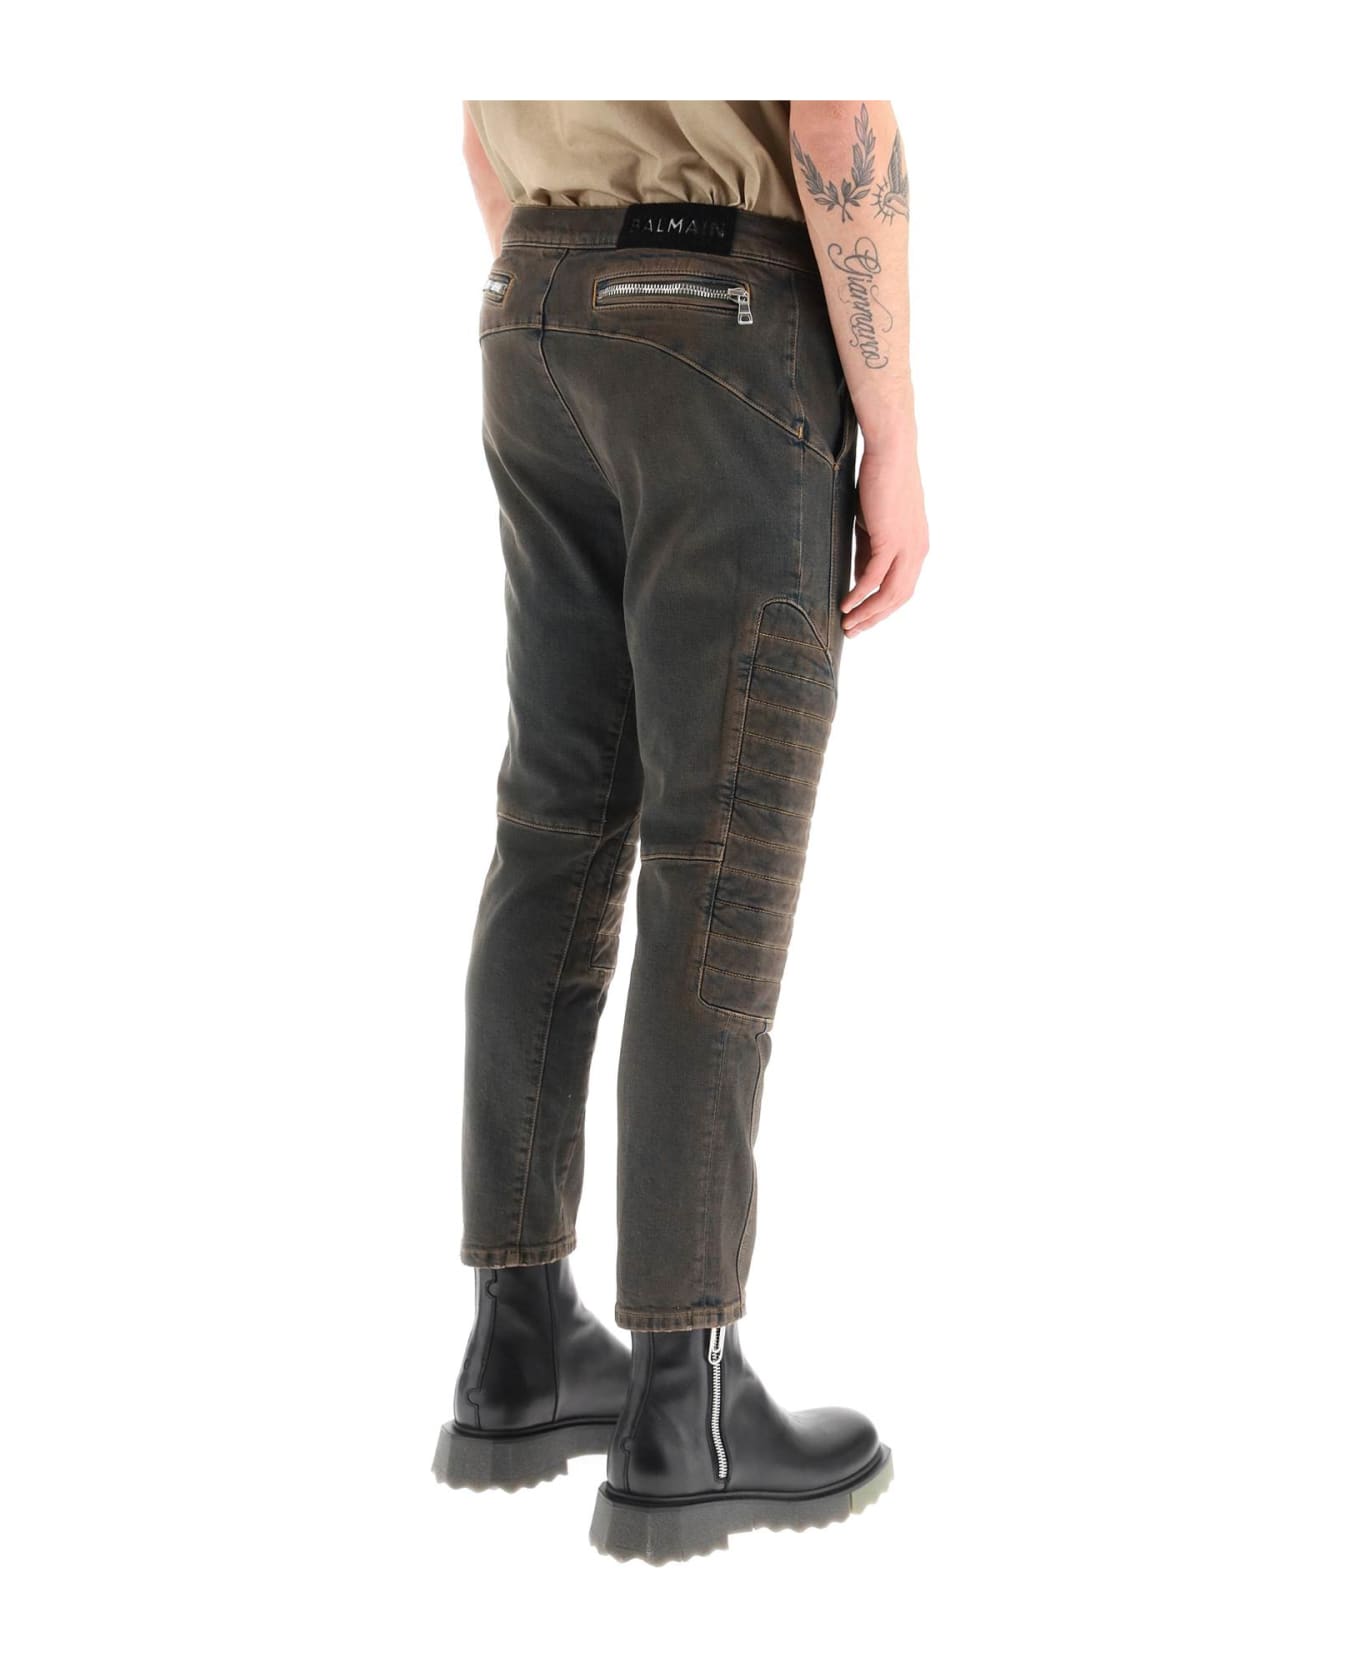 Balmain Stretch Jeans With Quilted And Padded Inserts - BLEU JEAN DIRTY (Brown)